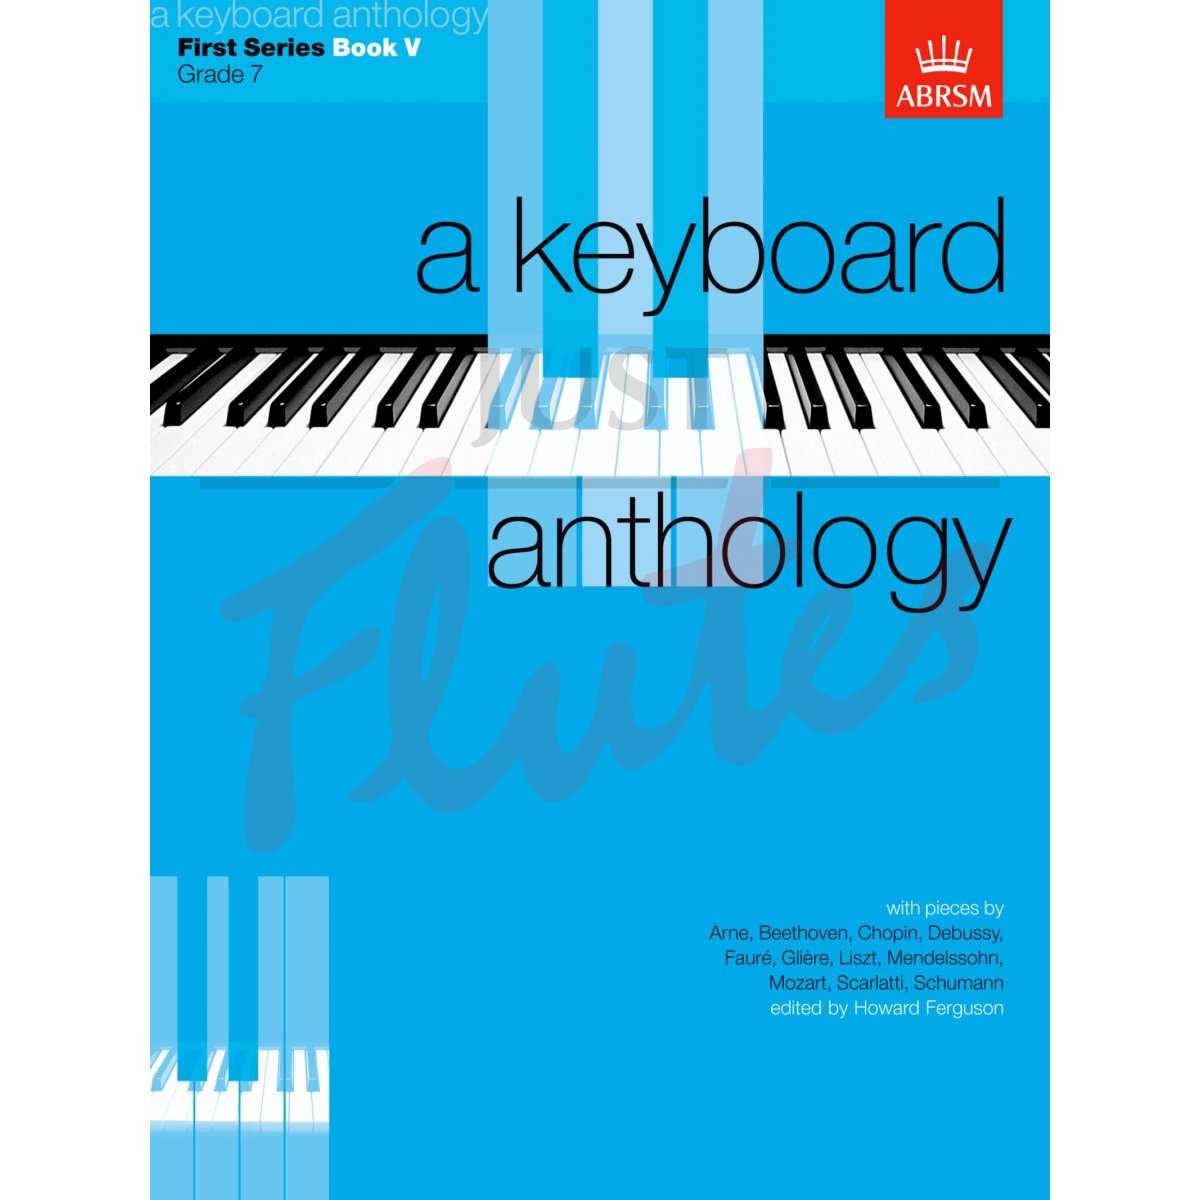 A Keyboard Anthology: First Series Book 5